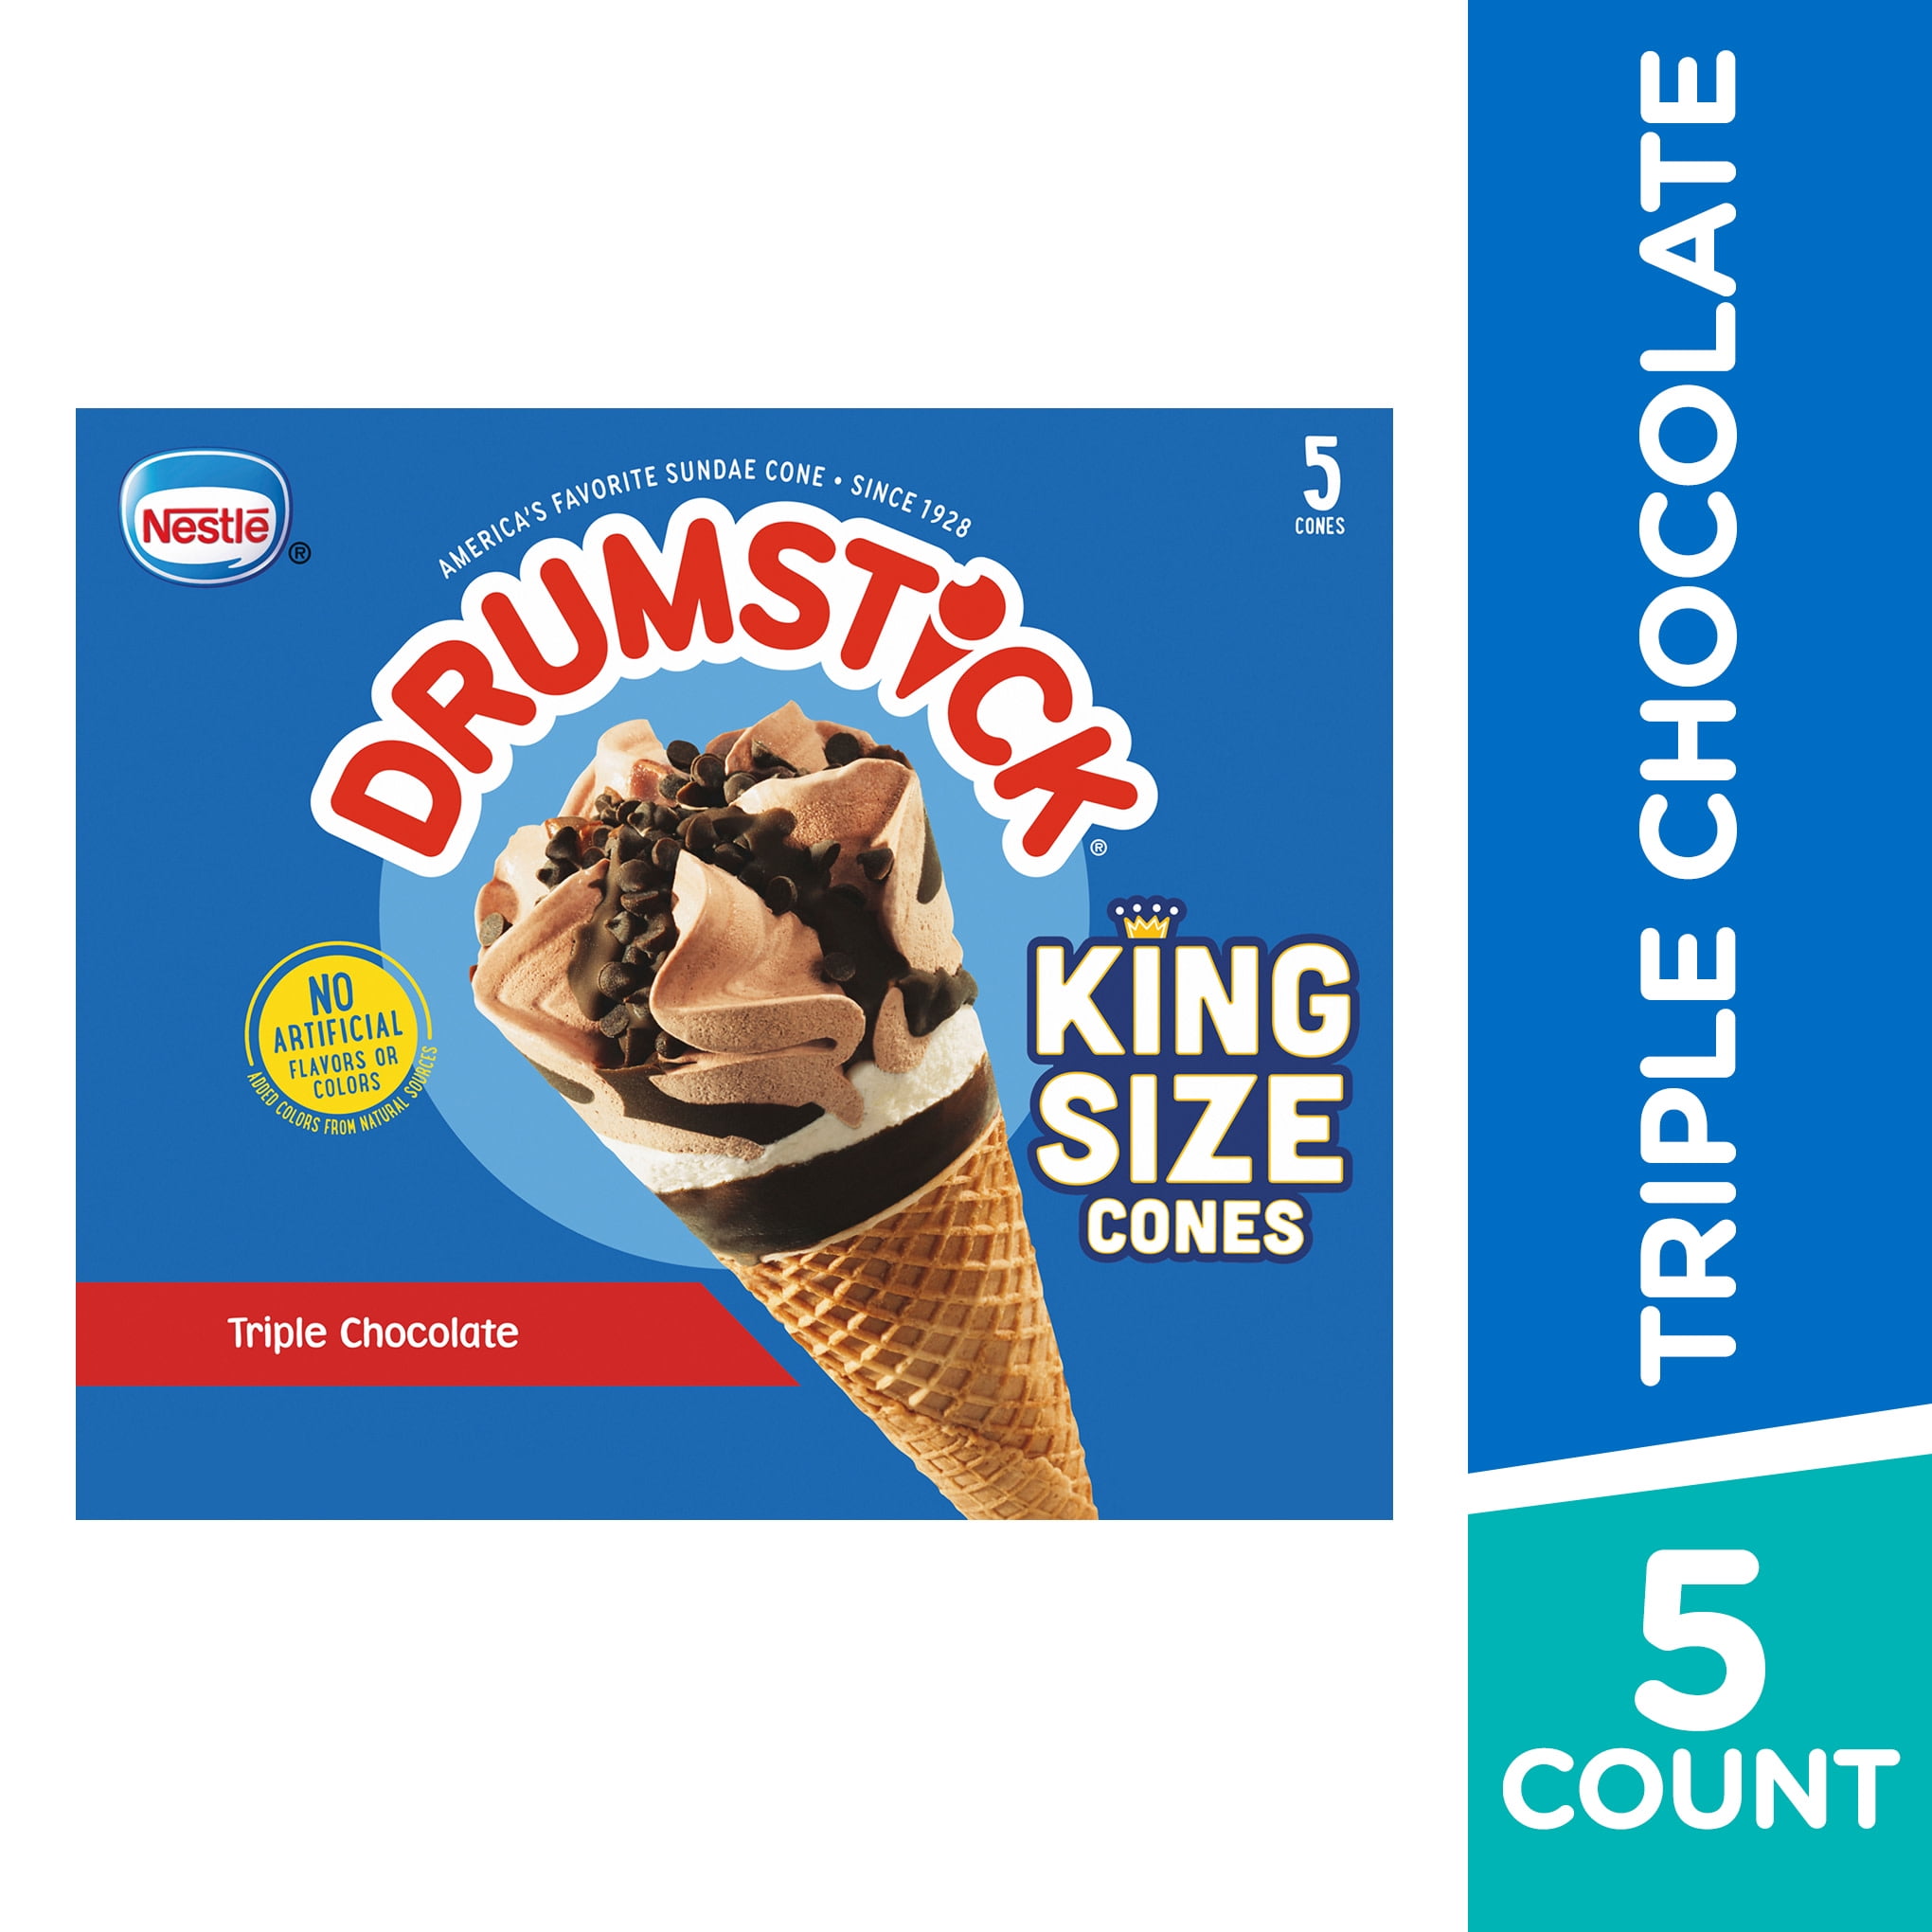 Does Burger King Have Ice Cream In 2022? (Types, Sizes, Quality + More)